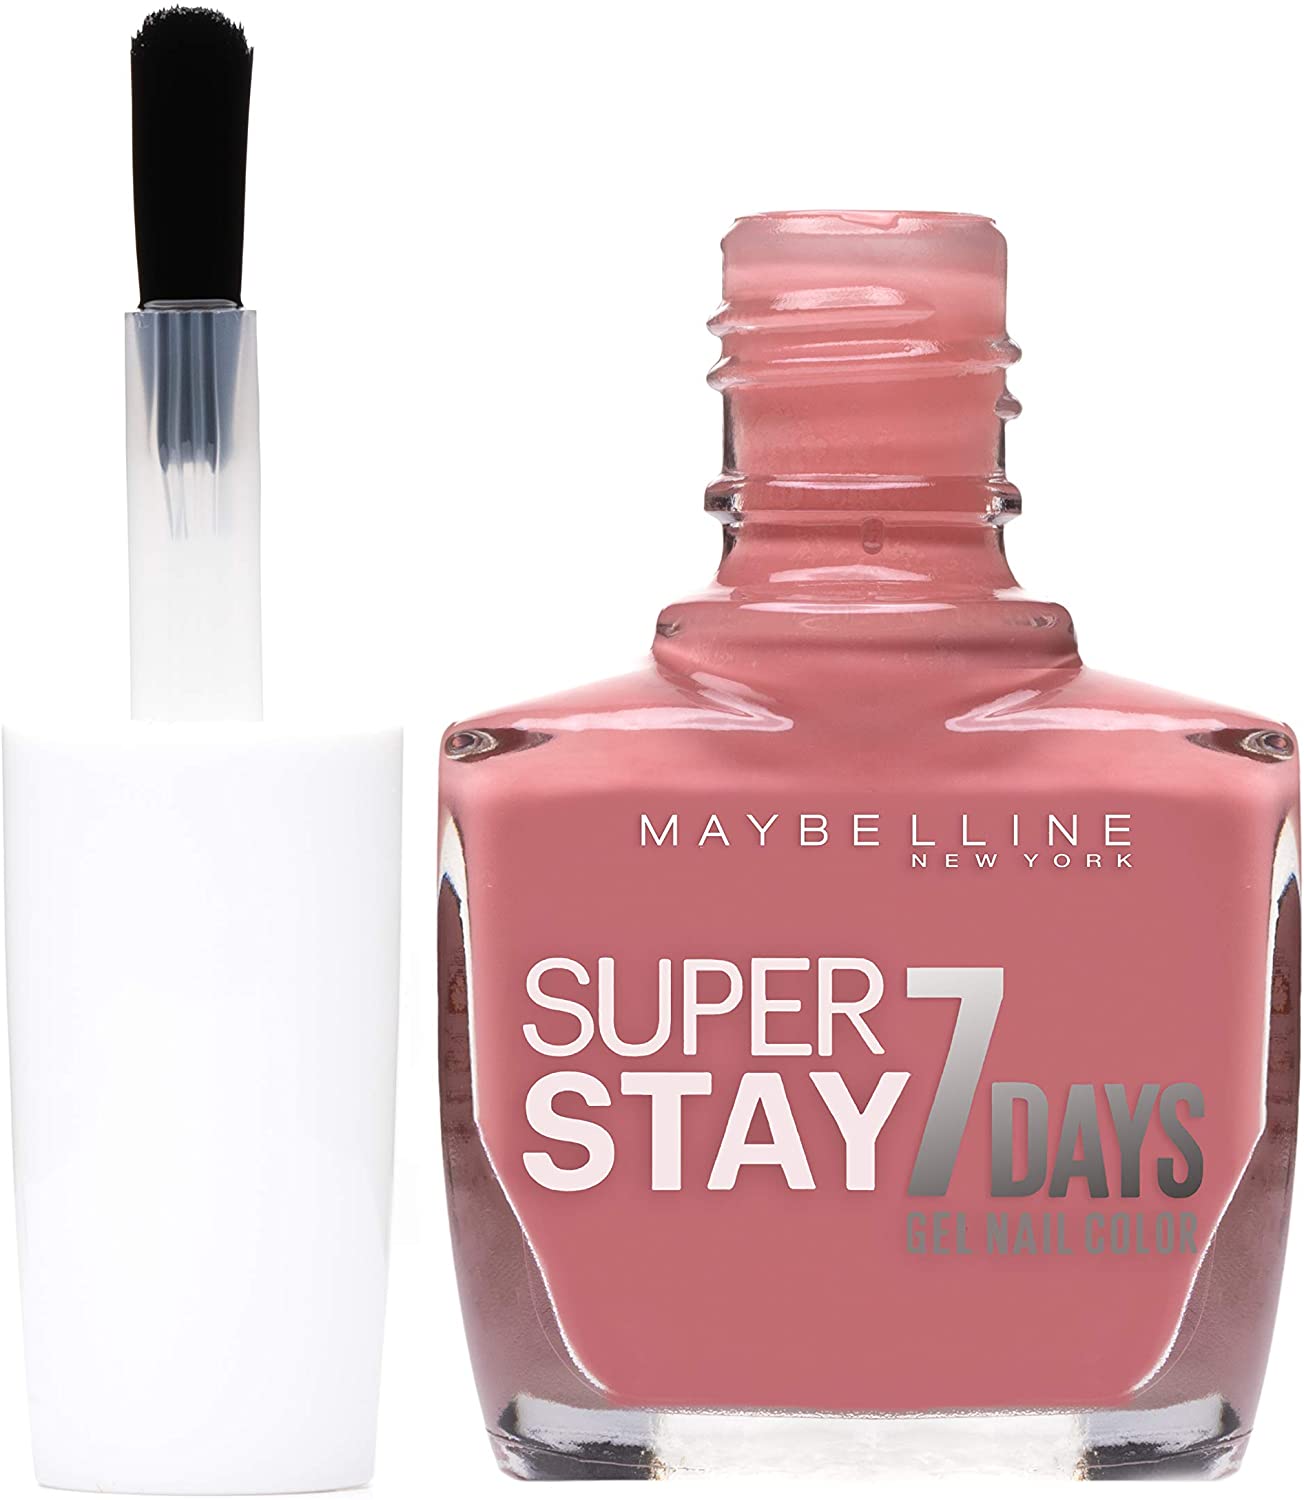 Maybelline Super Stay 7 Days Gel Nail Polish - Dusted Pearl